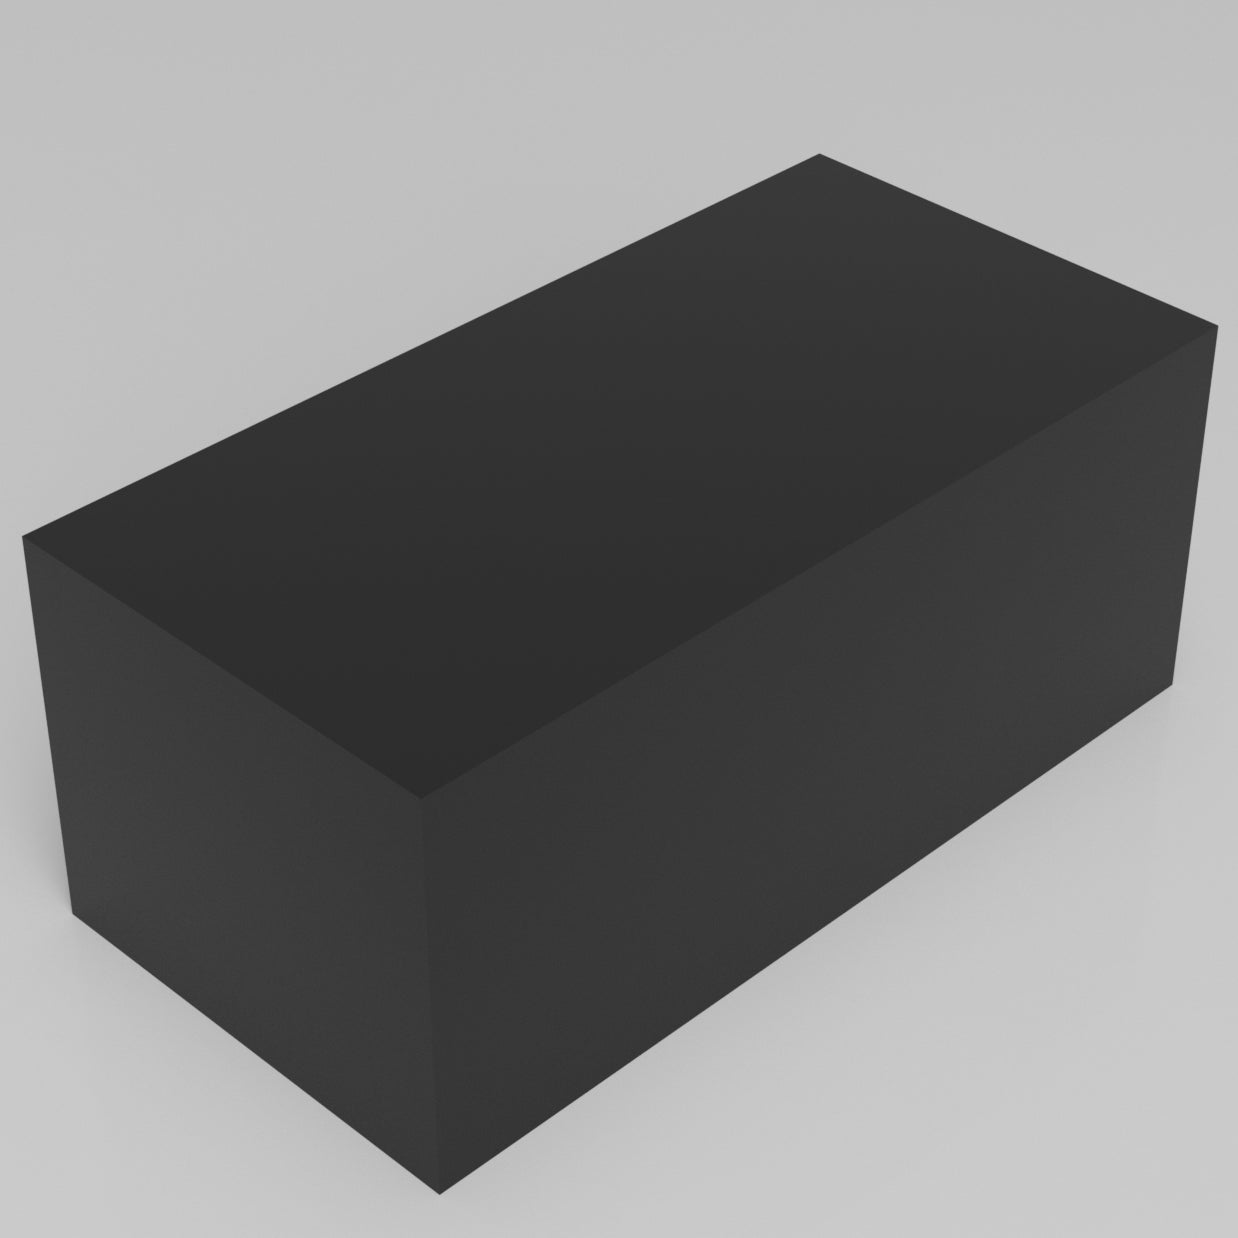 Machinable Wax Rectangular Block Front View 5 Inch by 6 Inch by 12 Inch